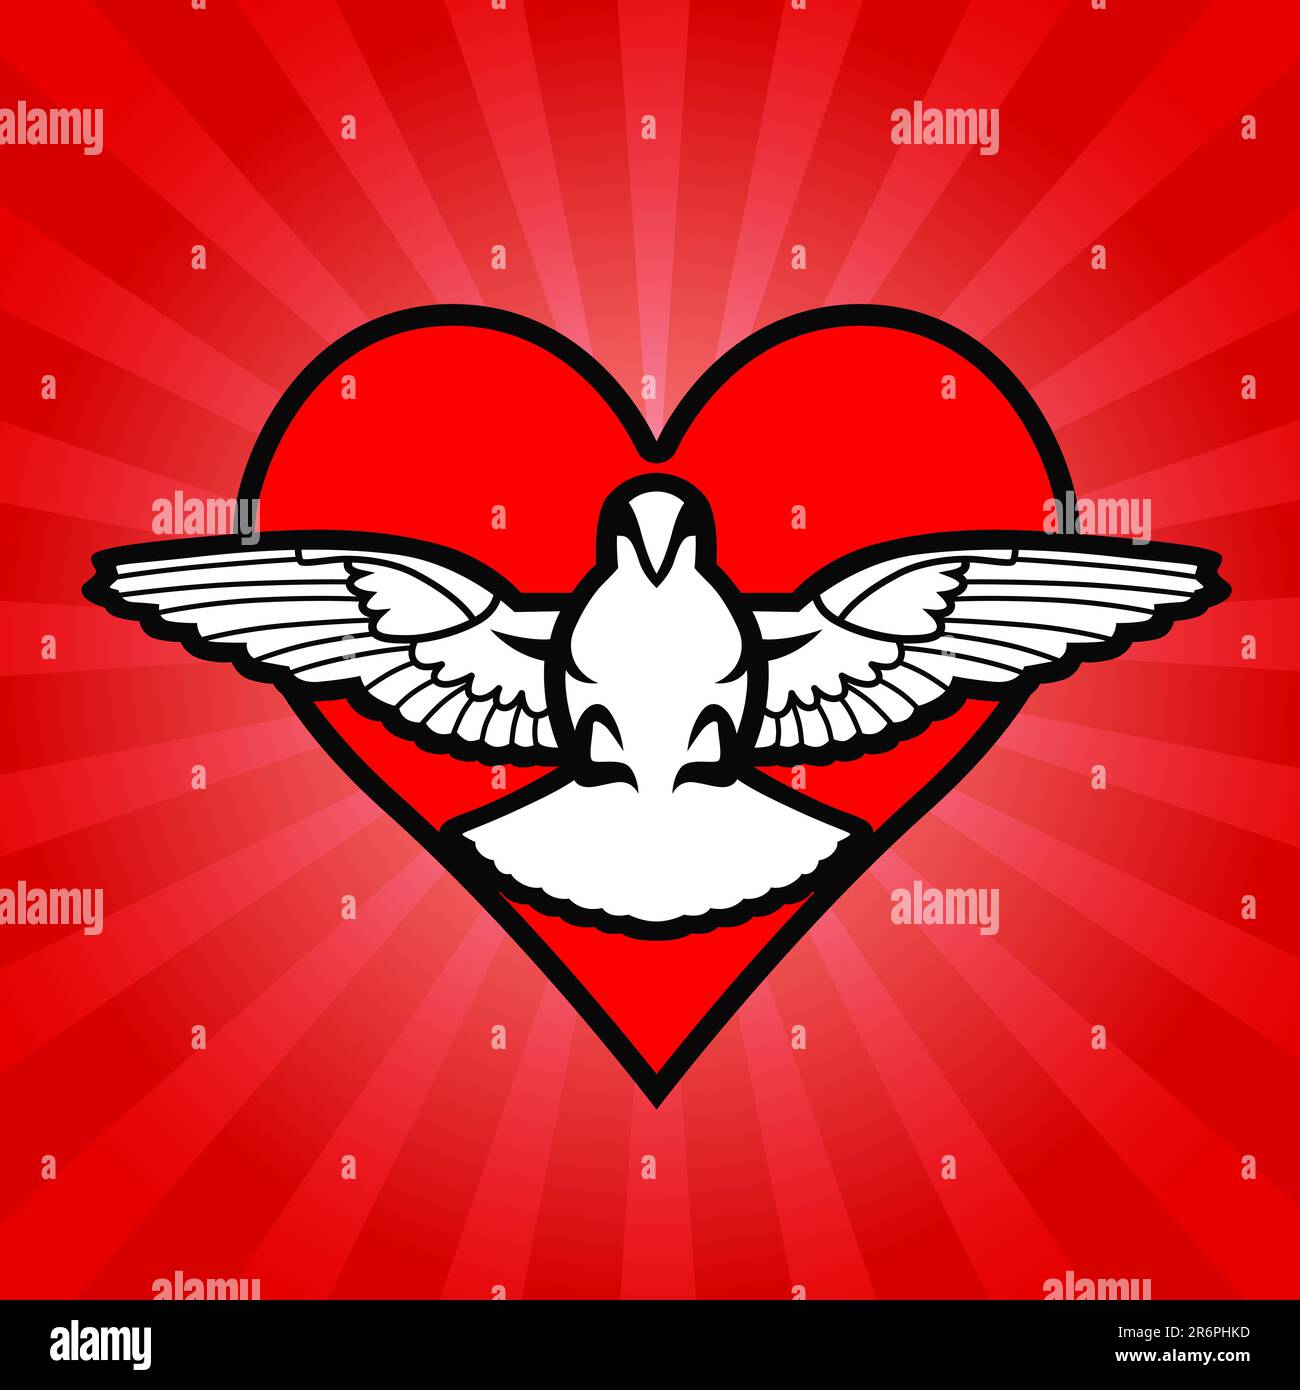 Pigeon and heart against beams Stock Vector